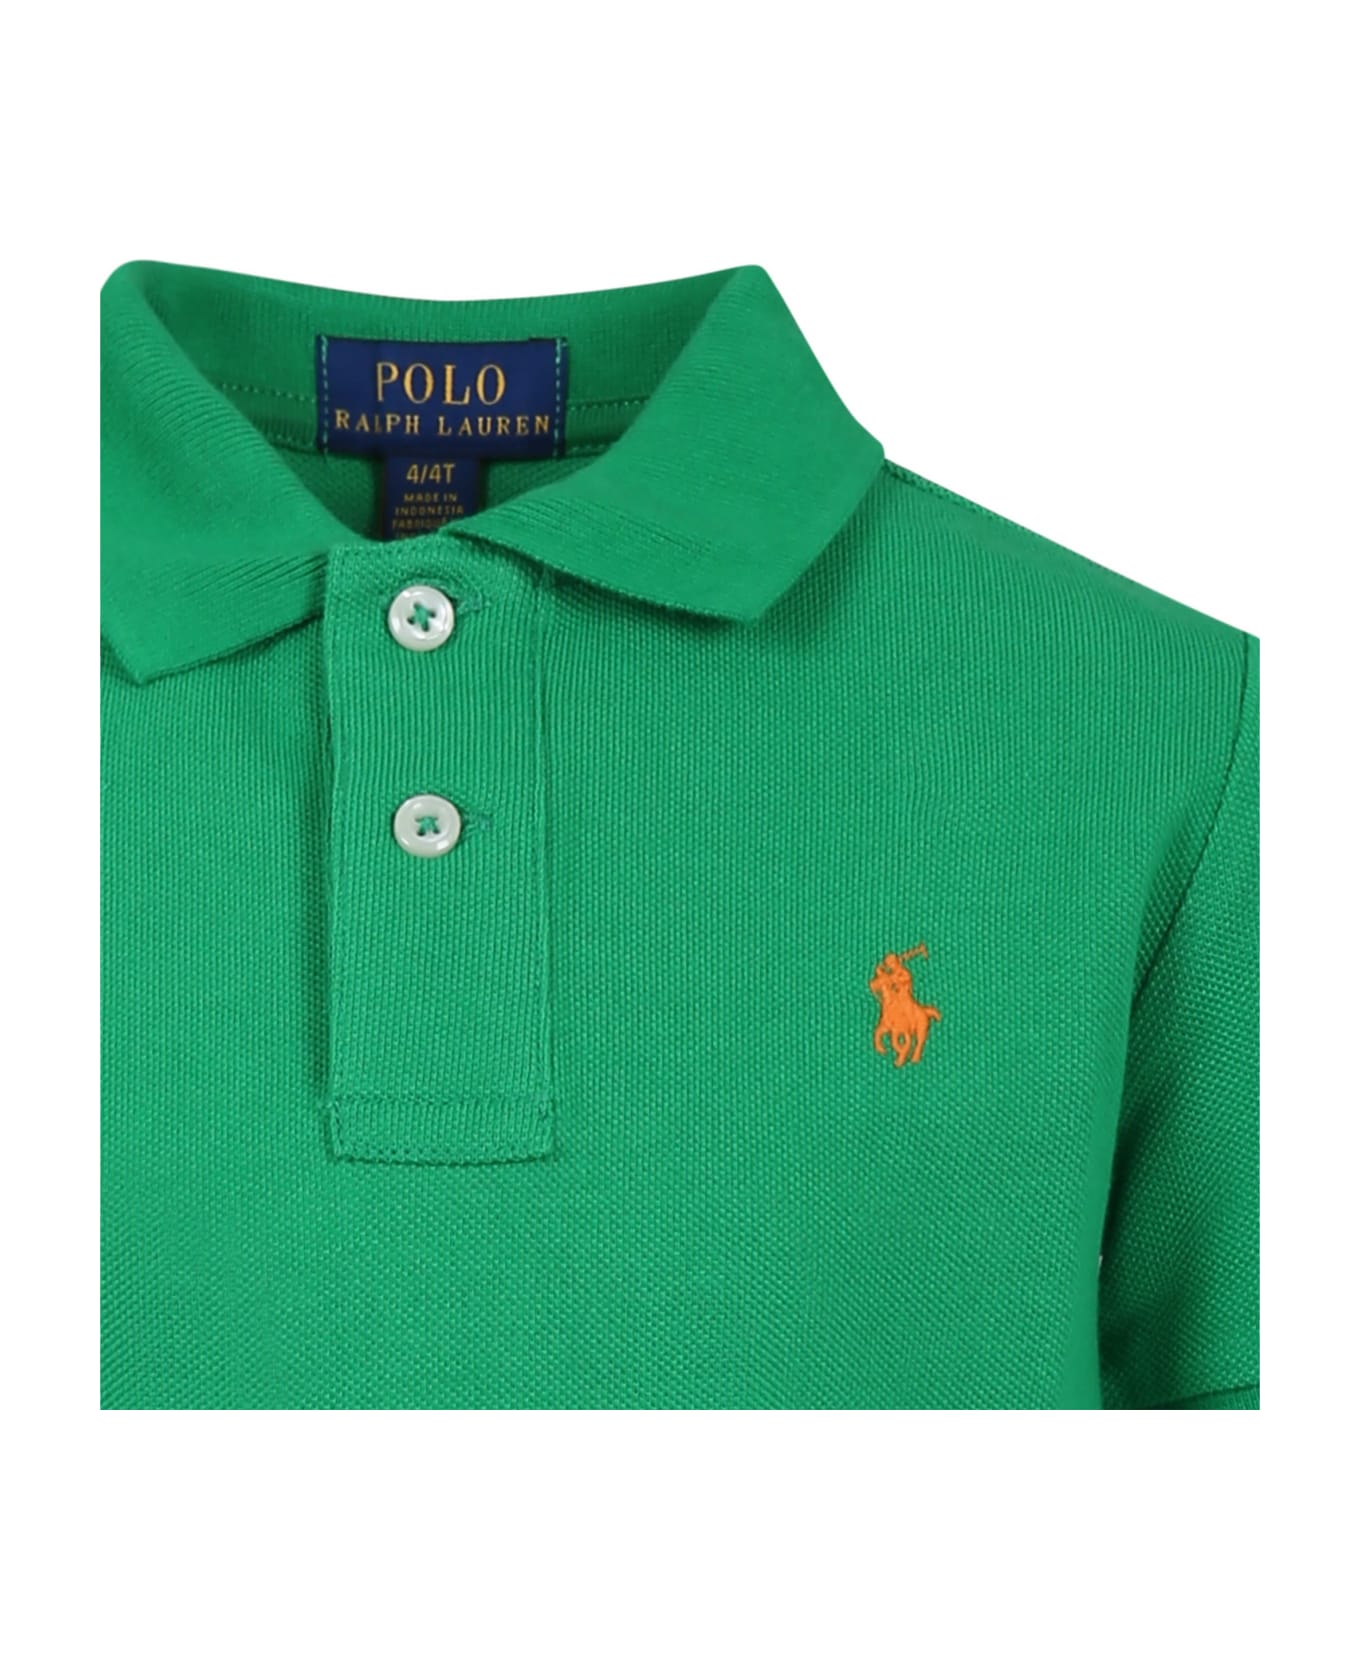 Ralph Lauren Green Polo Shirt For Boy With Iconic Poney - Green